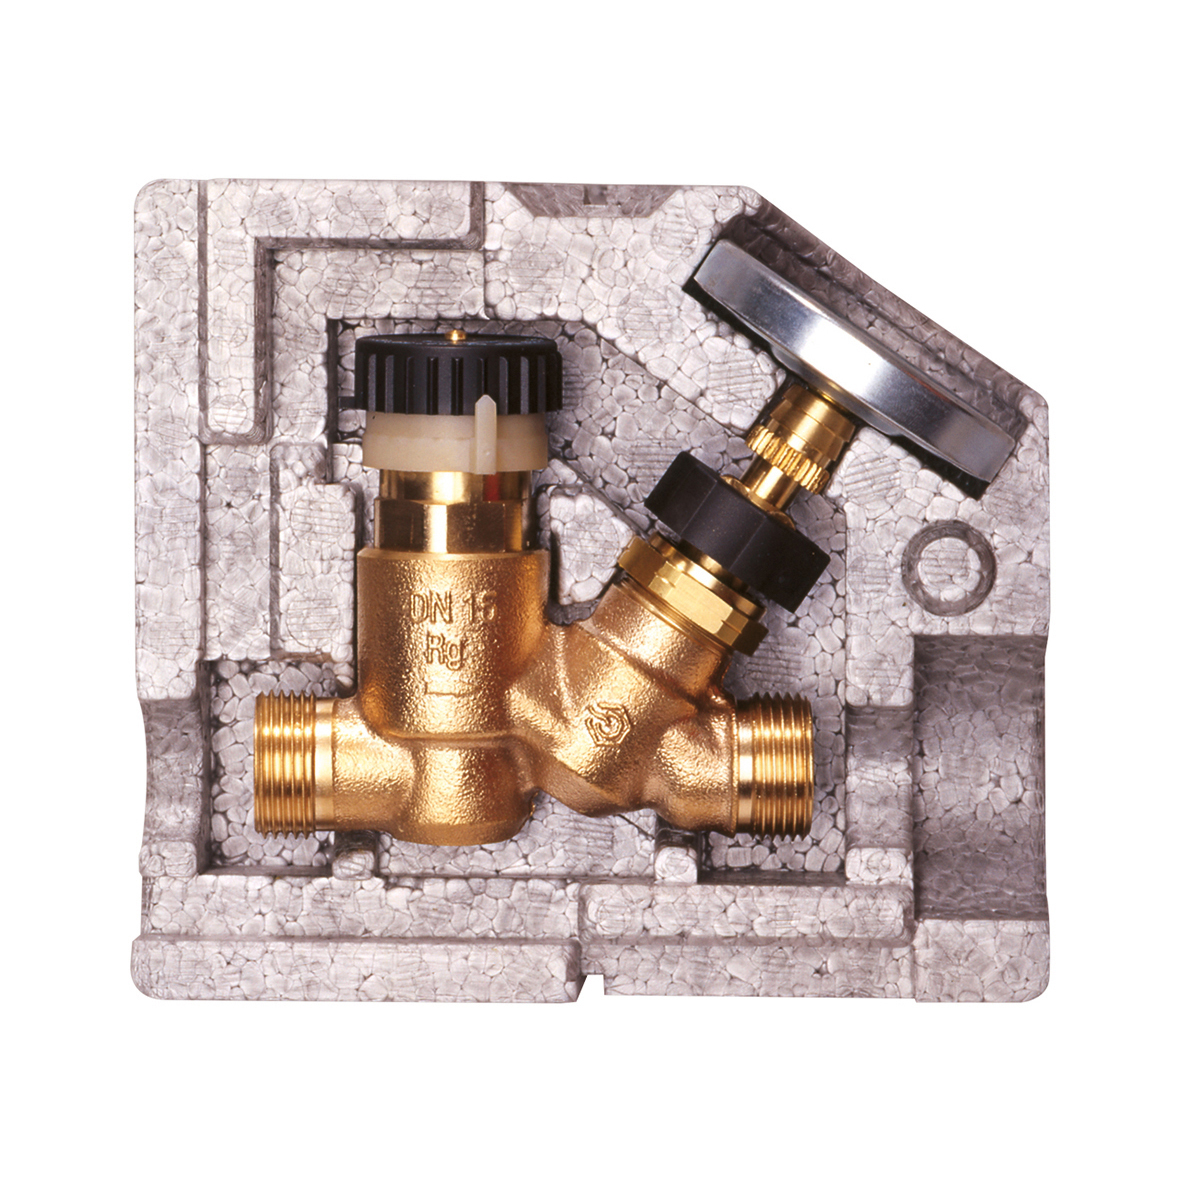 NexusValve TW - Domestic water circulation valves with insulation and male thread